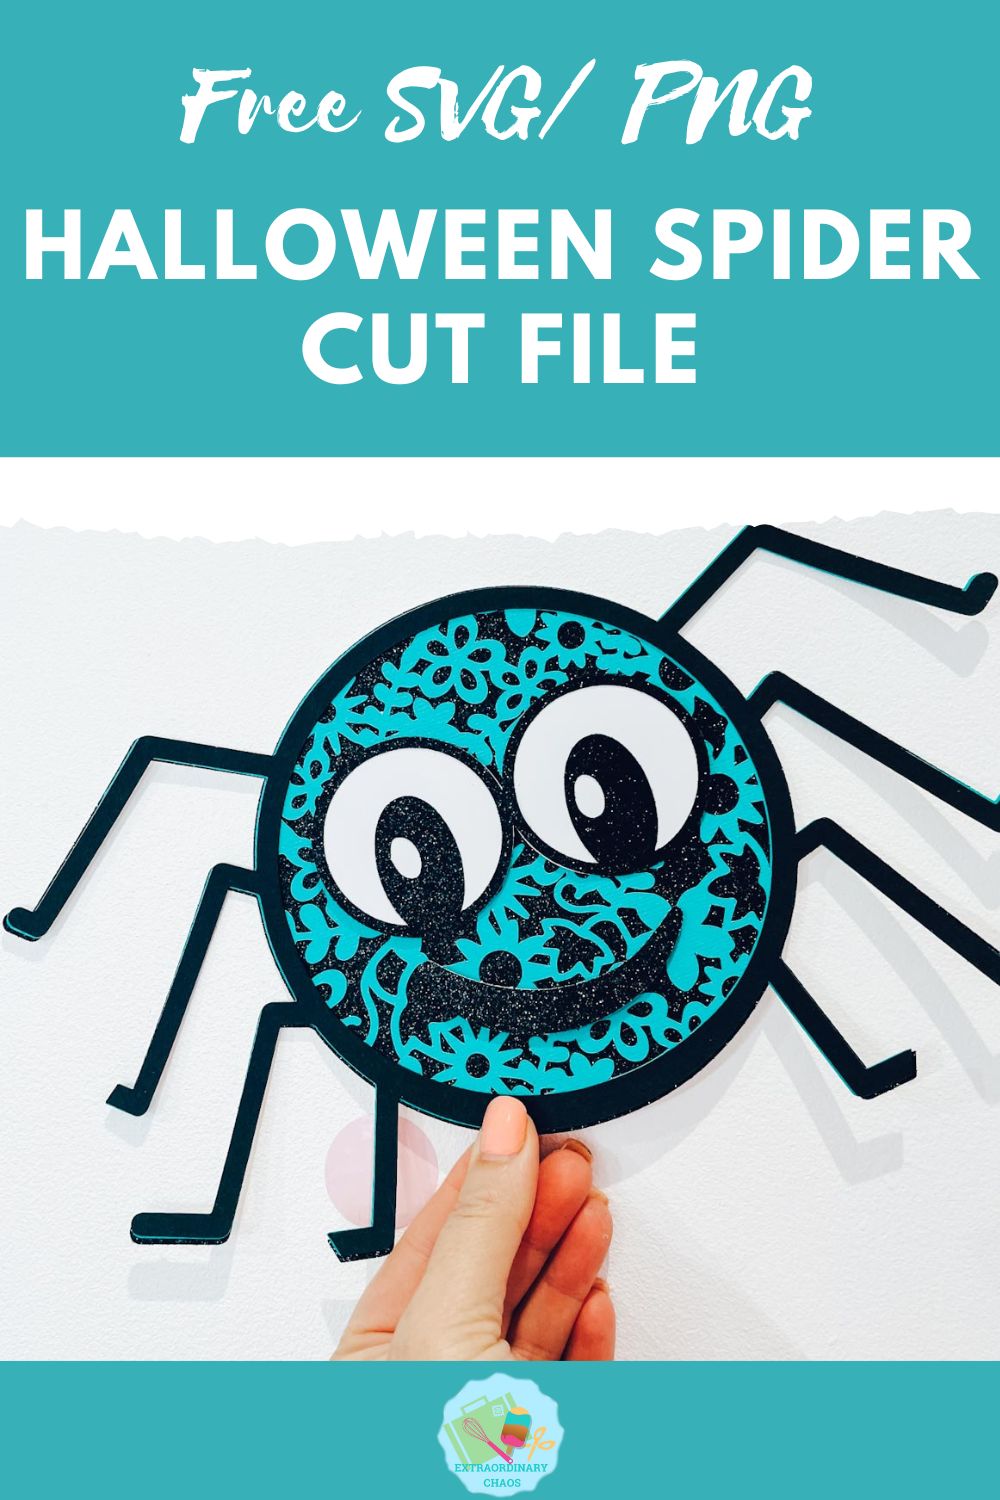 Free Halloween Spider Cut file SVG, PNG for Cricut, Glowforge